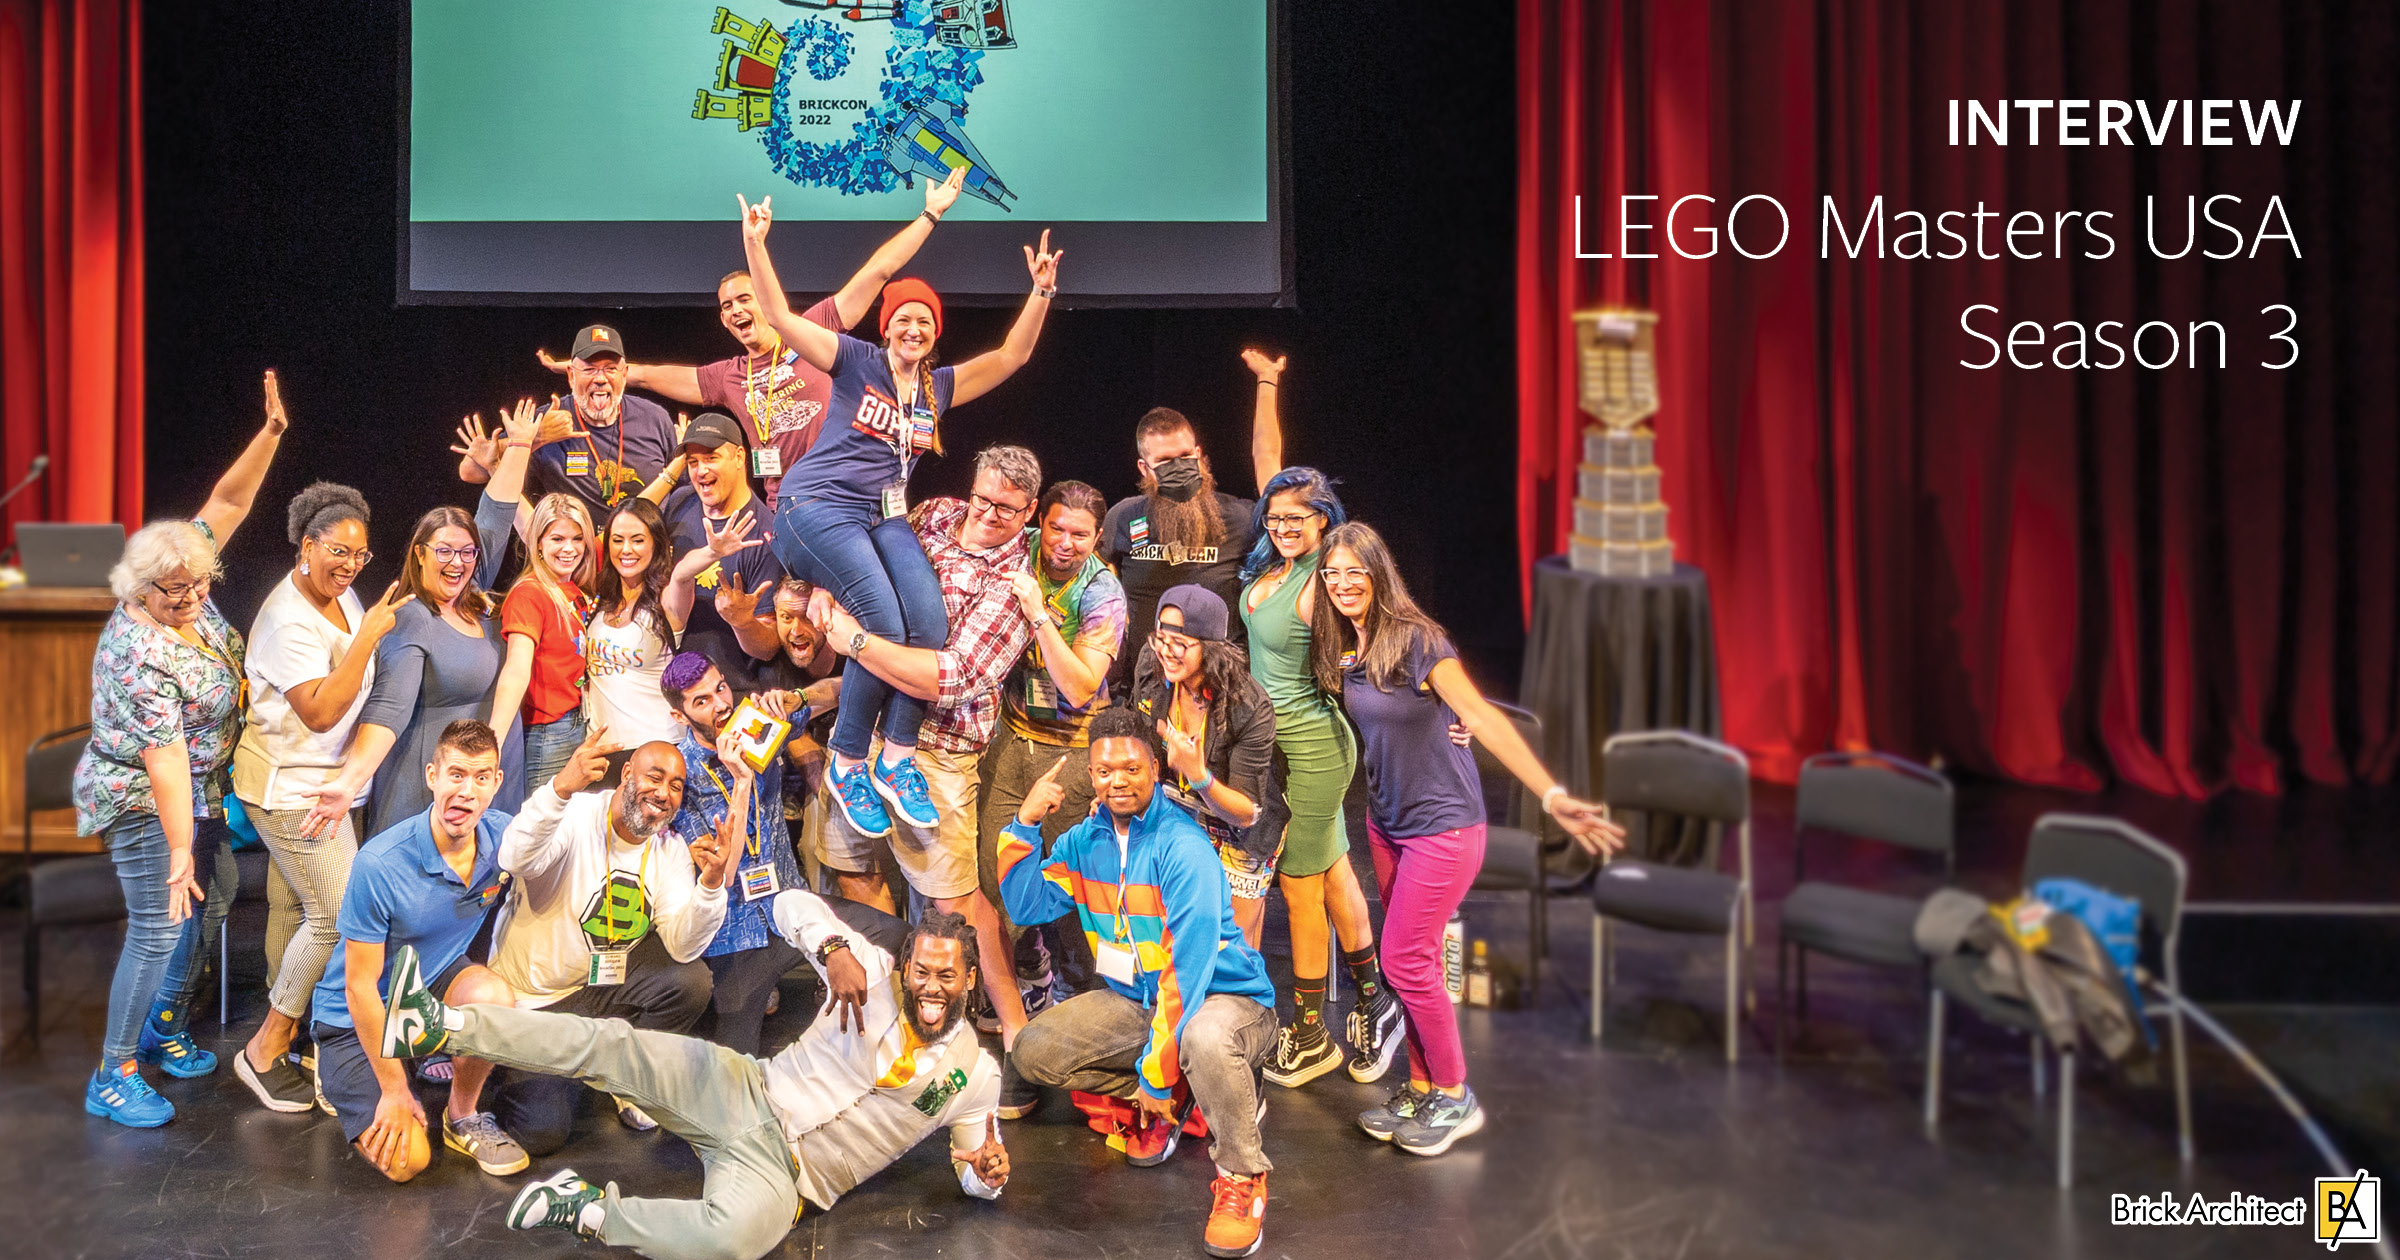 I'm thrilled to share personal stories from the LEGO Masters USA Season 3 contestants.